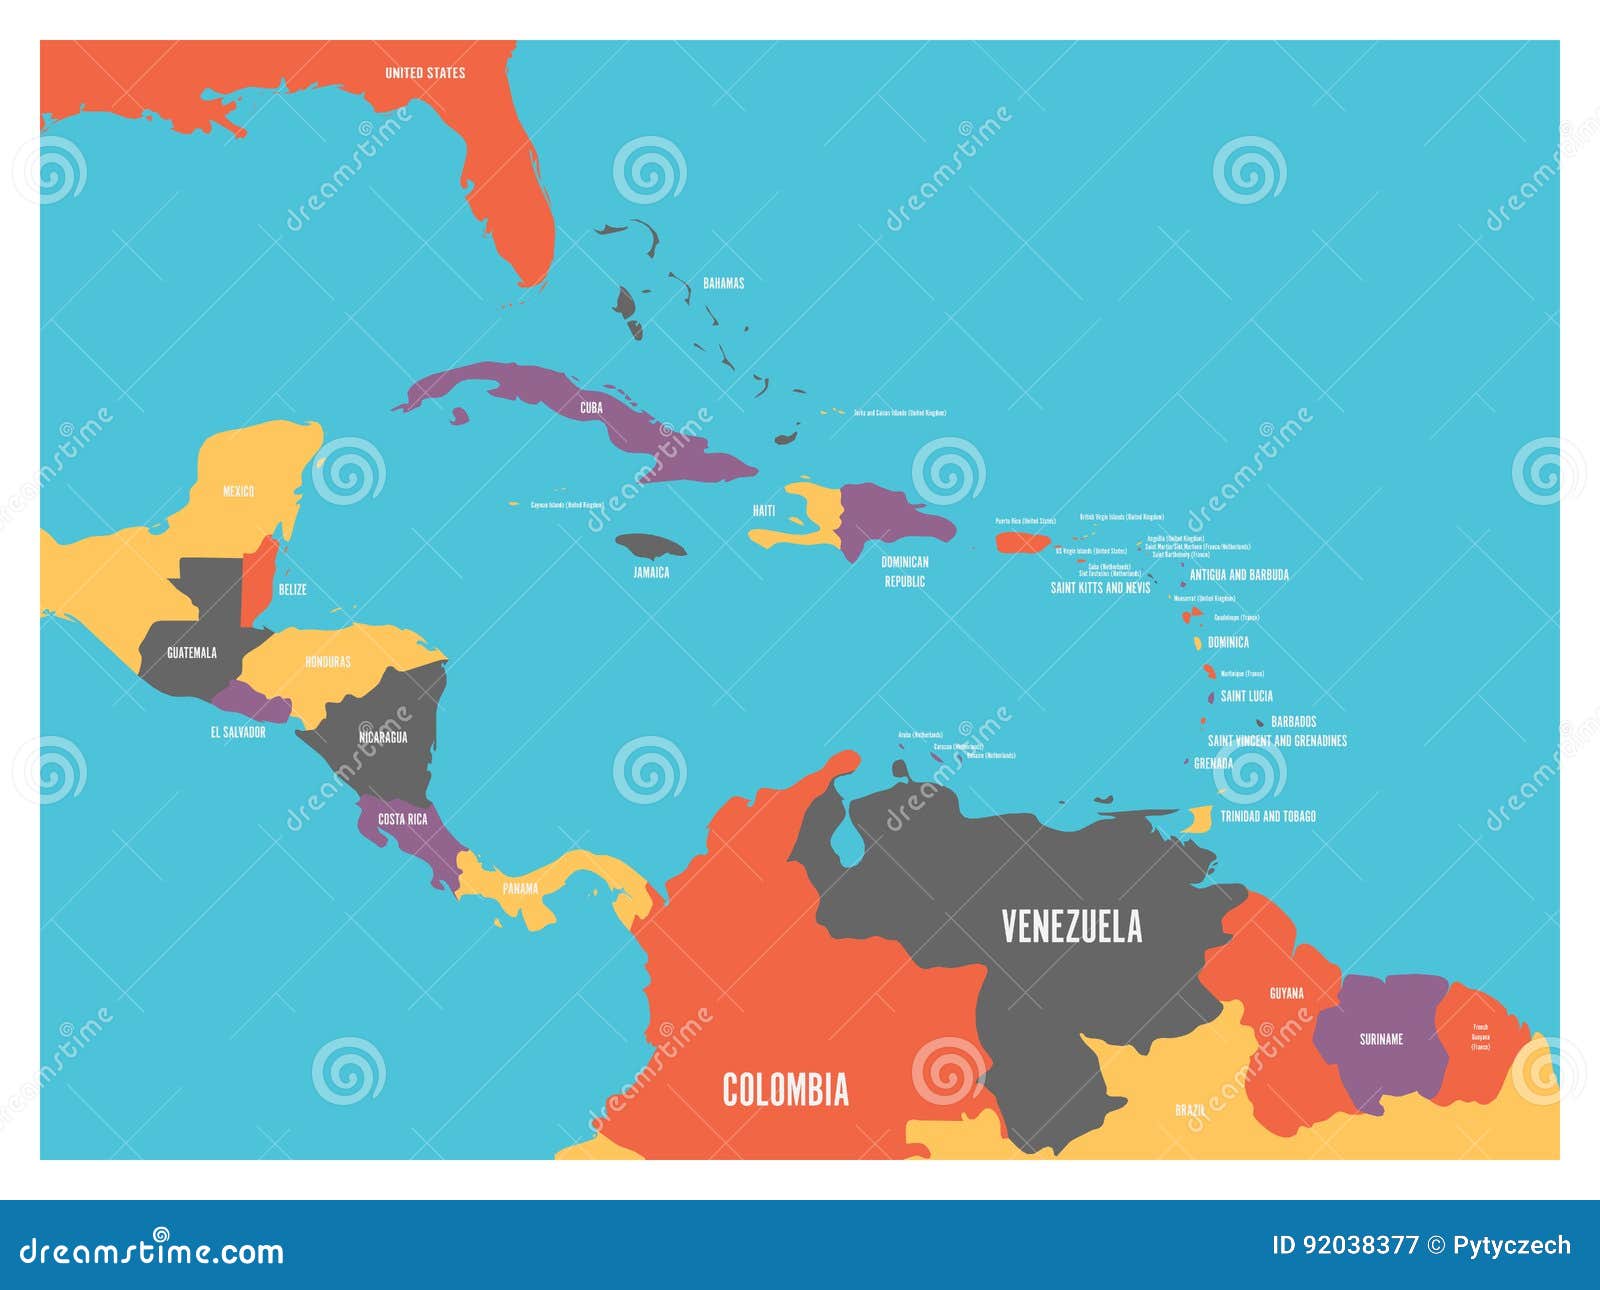 central america and carribean states political map with country names labels. simple flat  